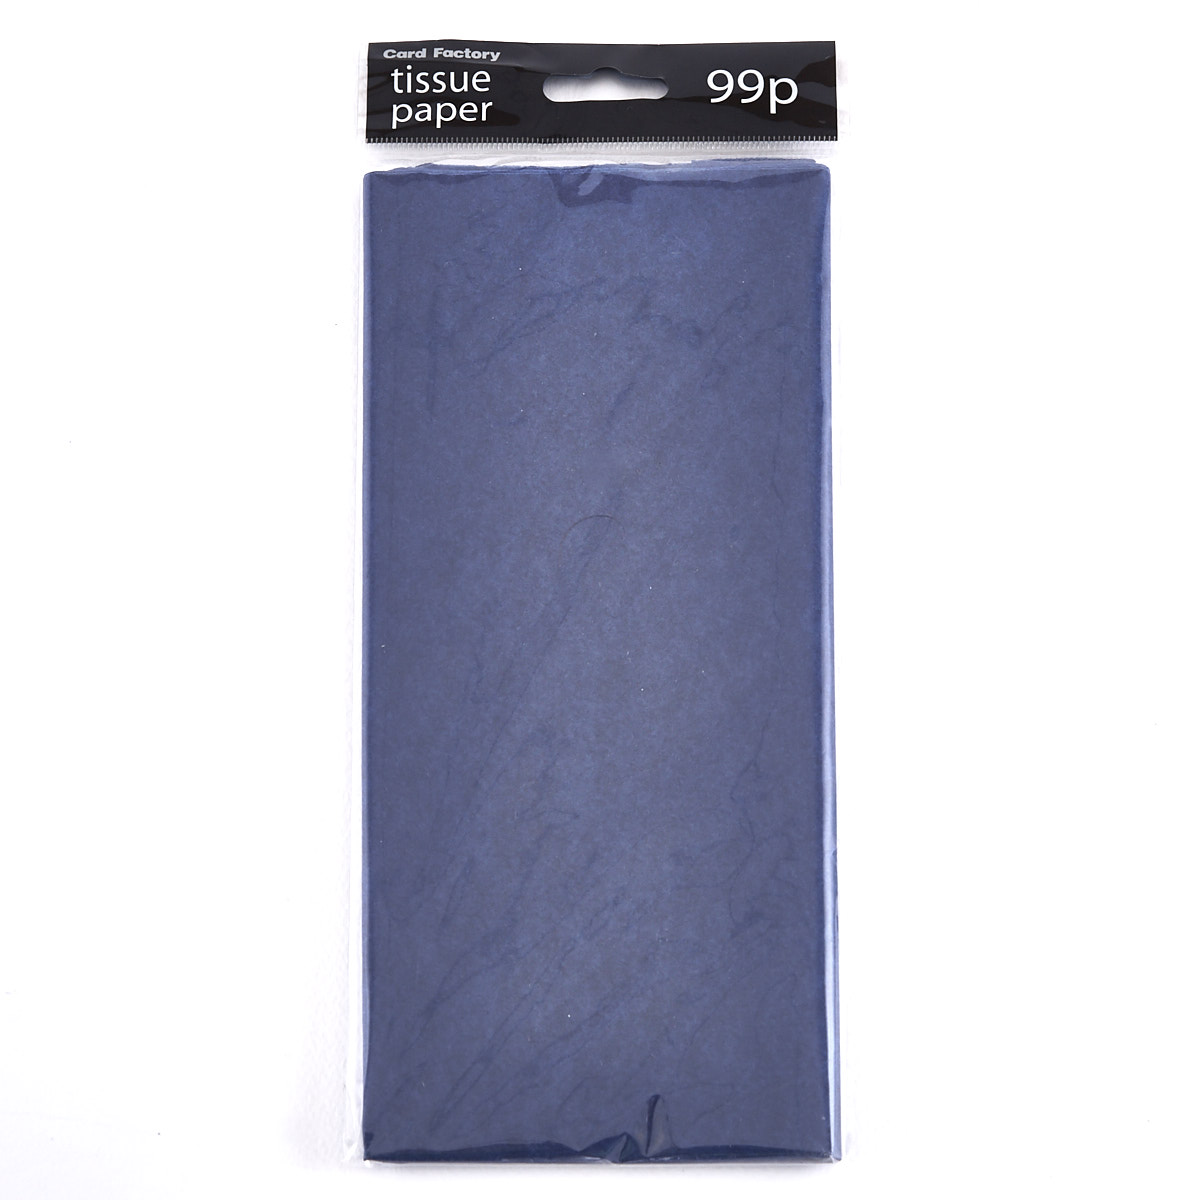 Navy Blue Tissue Paper - 10 Sheets